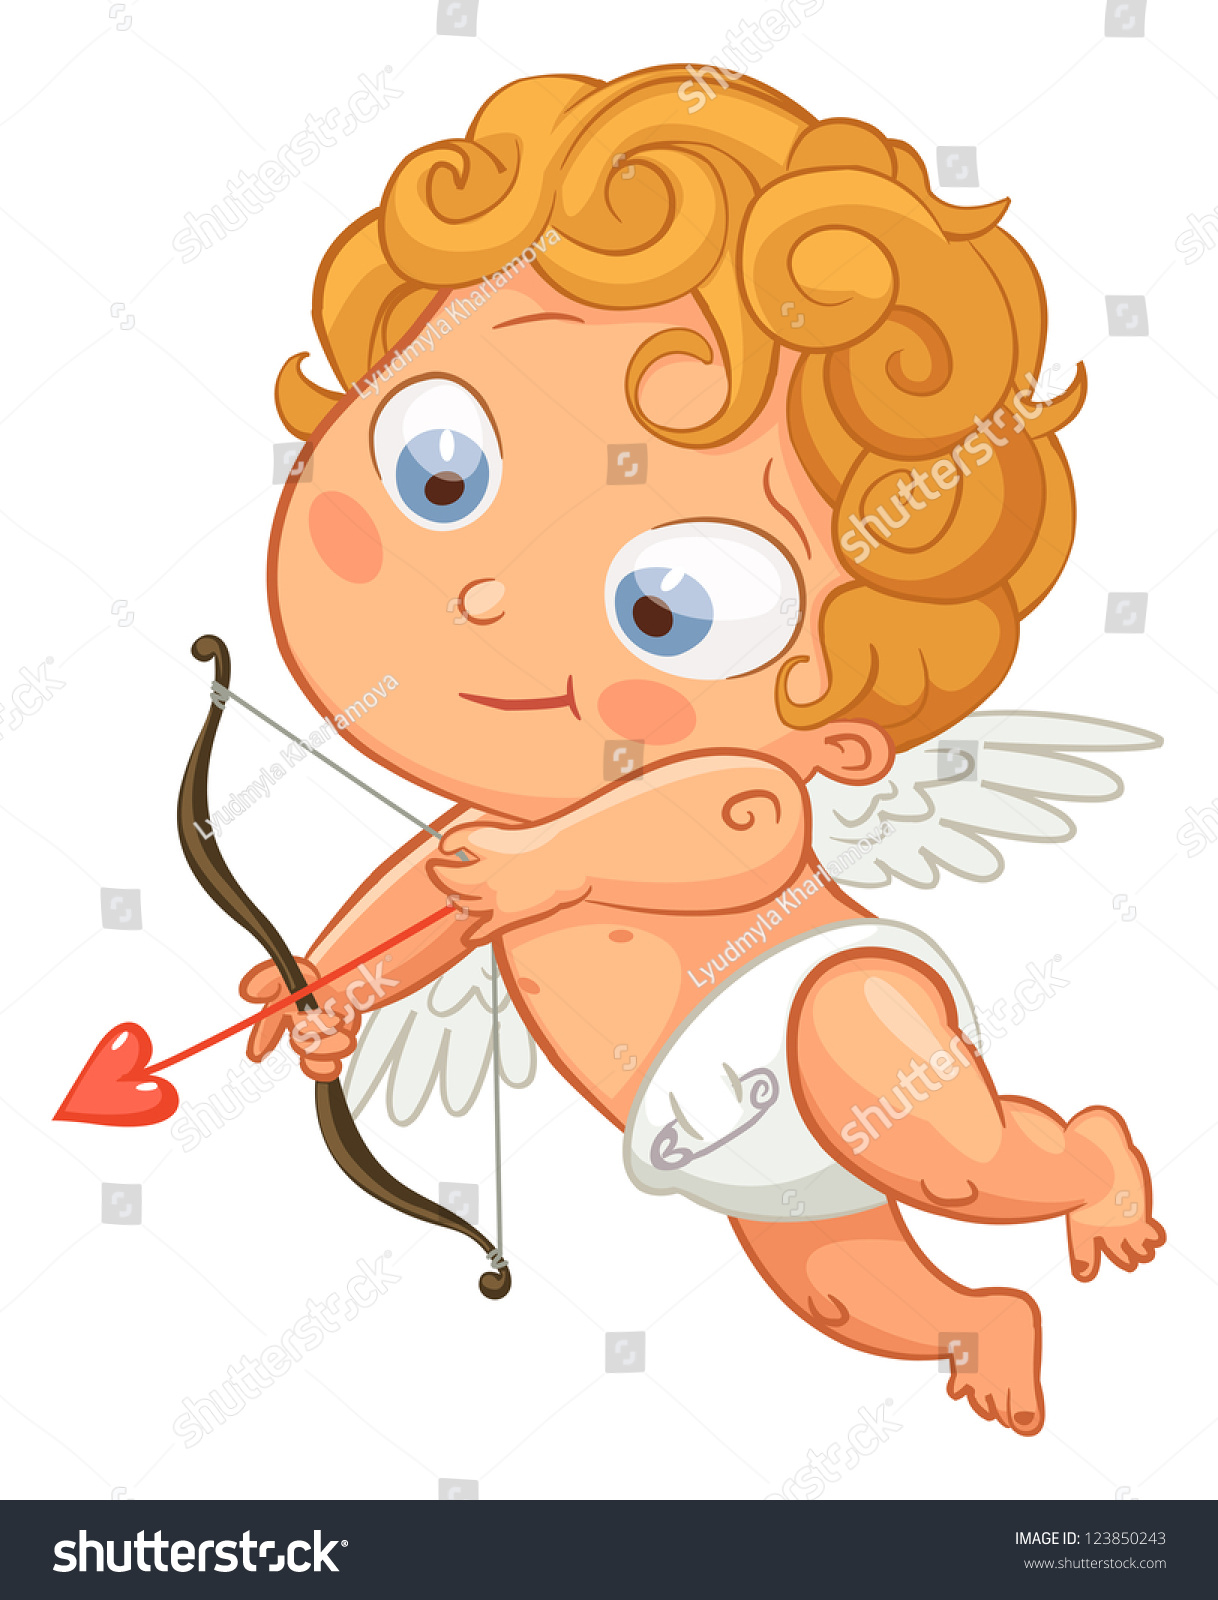 Funny Little Cupid Aiming Someone Illustration Stock Vector 123850243 Shutterstock 7430